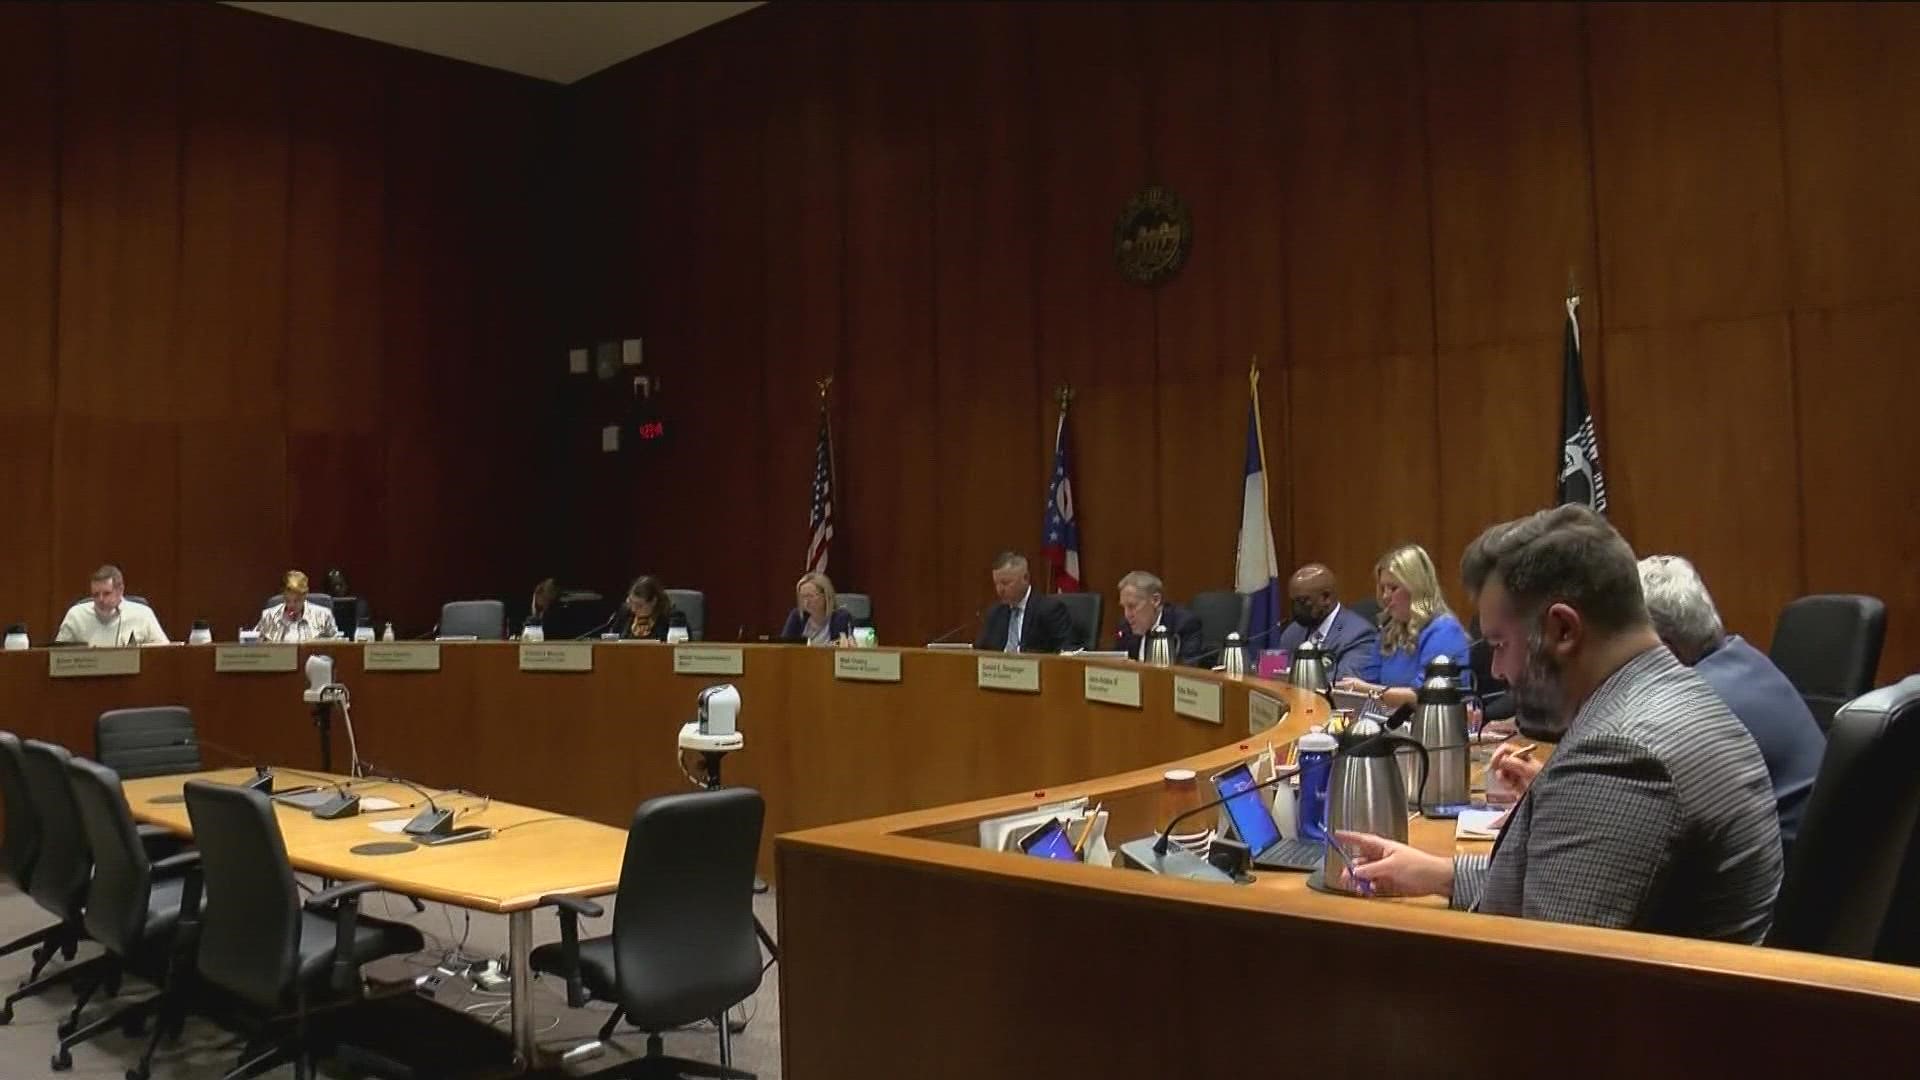 The amended ordinance supports allocating $800,000 in funds toward medical debt relief, with another $800,000 pending Lucas County commissioners' approval.